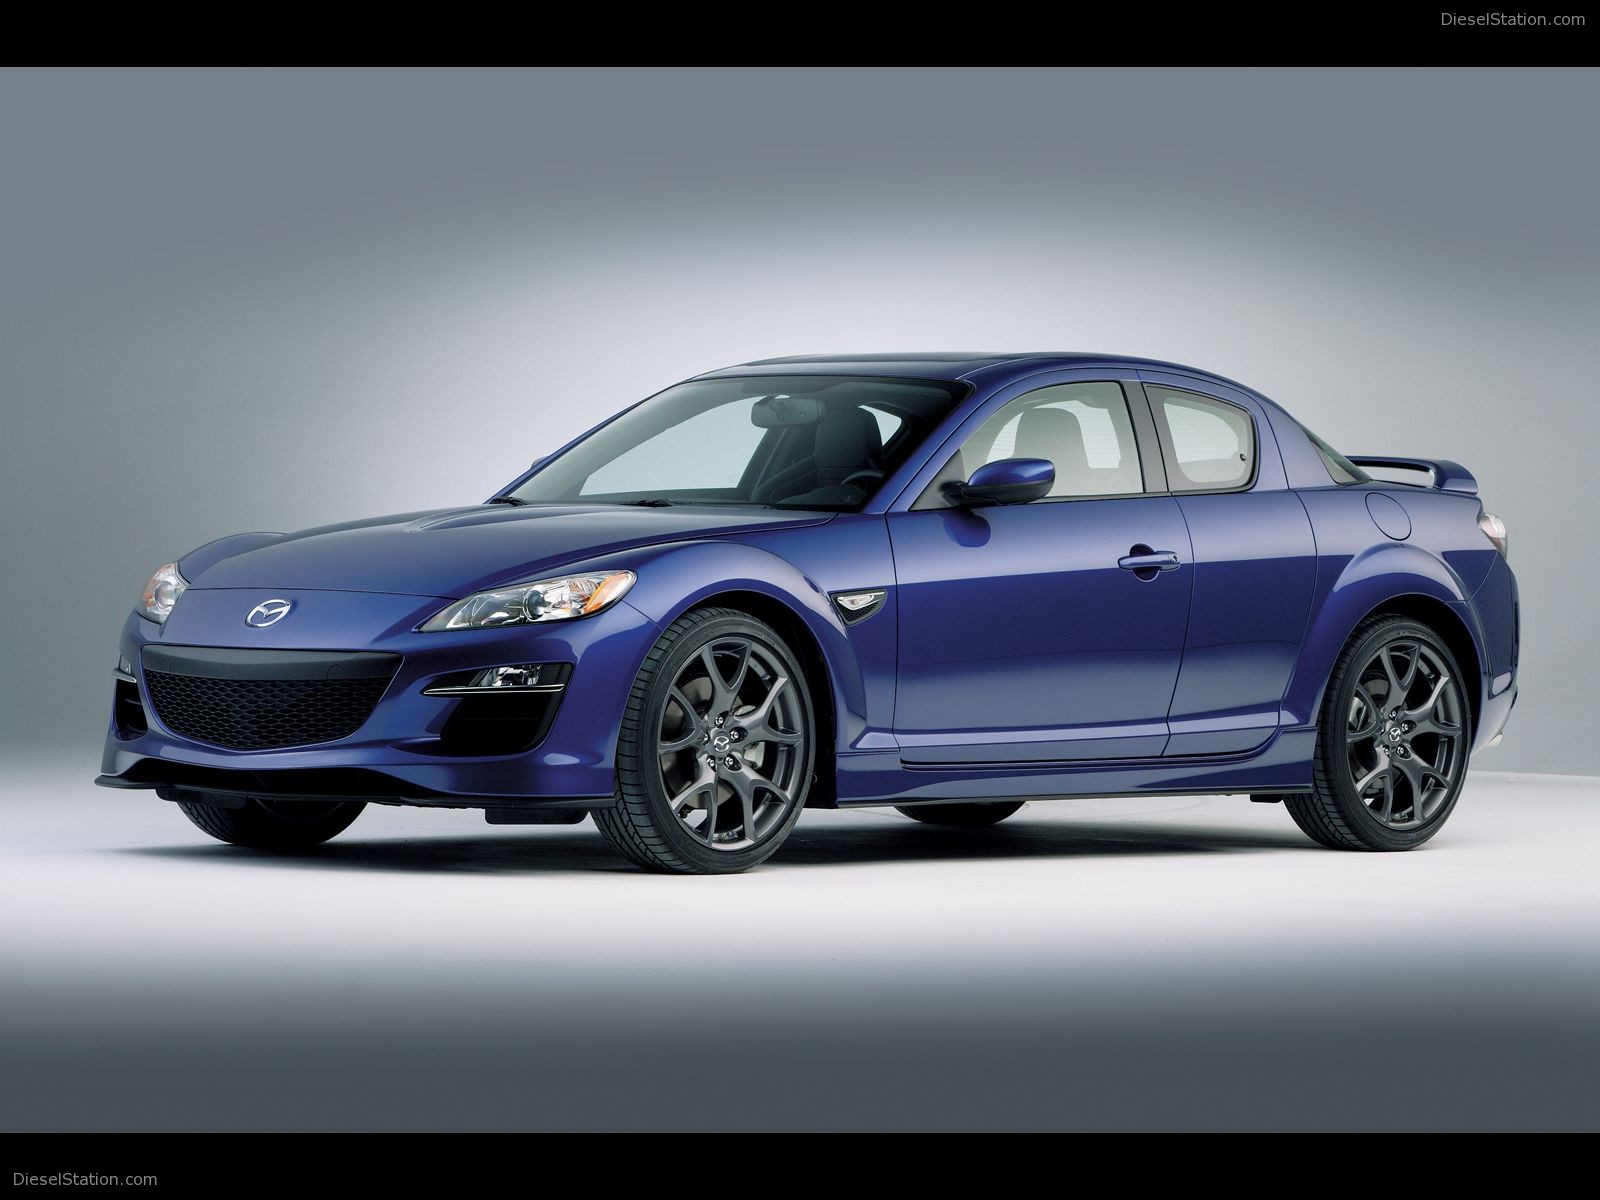 Mazda Rx8 Pictures Exotic Car Wallpaper Of Diesel